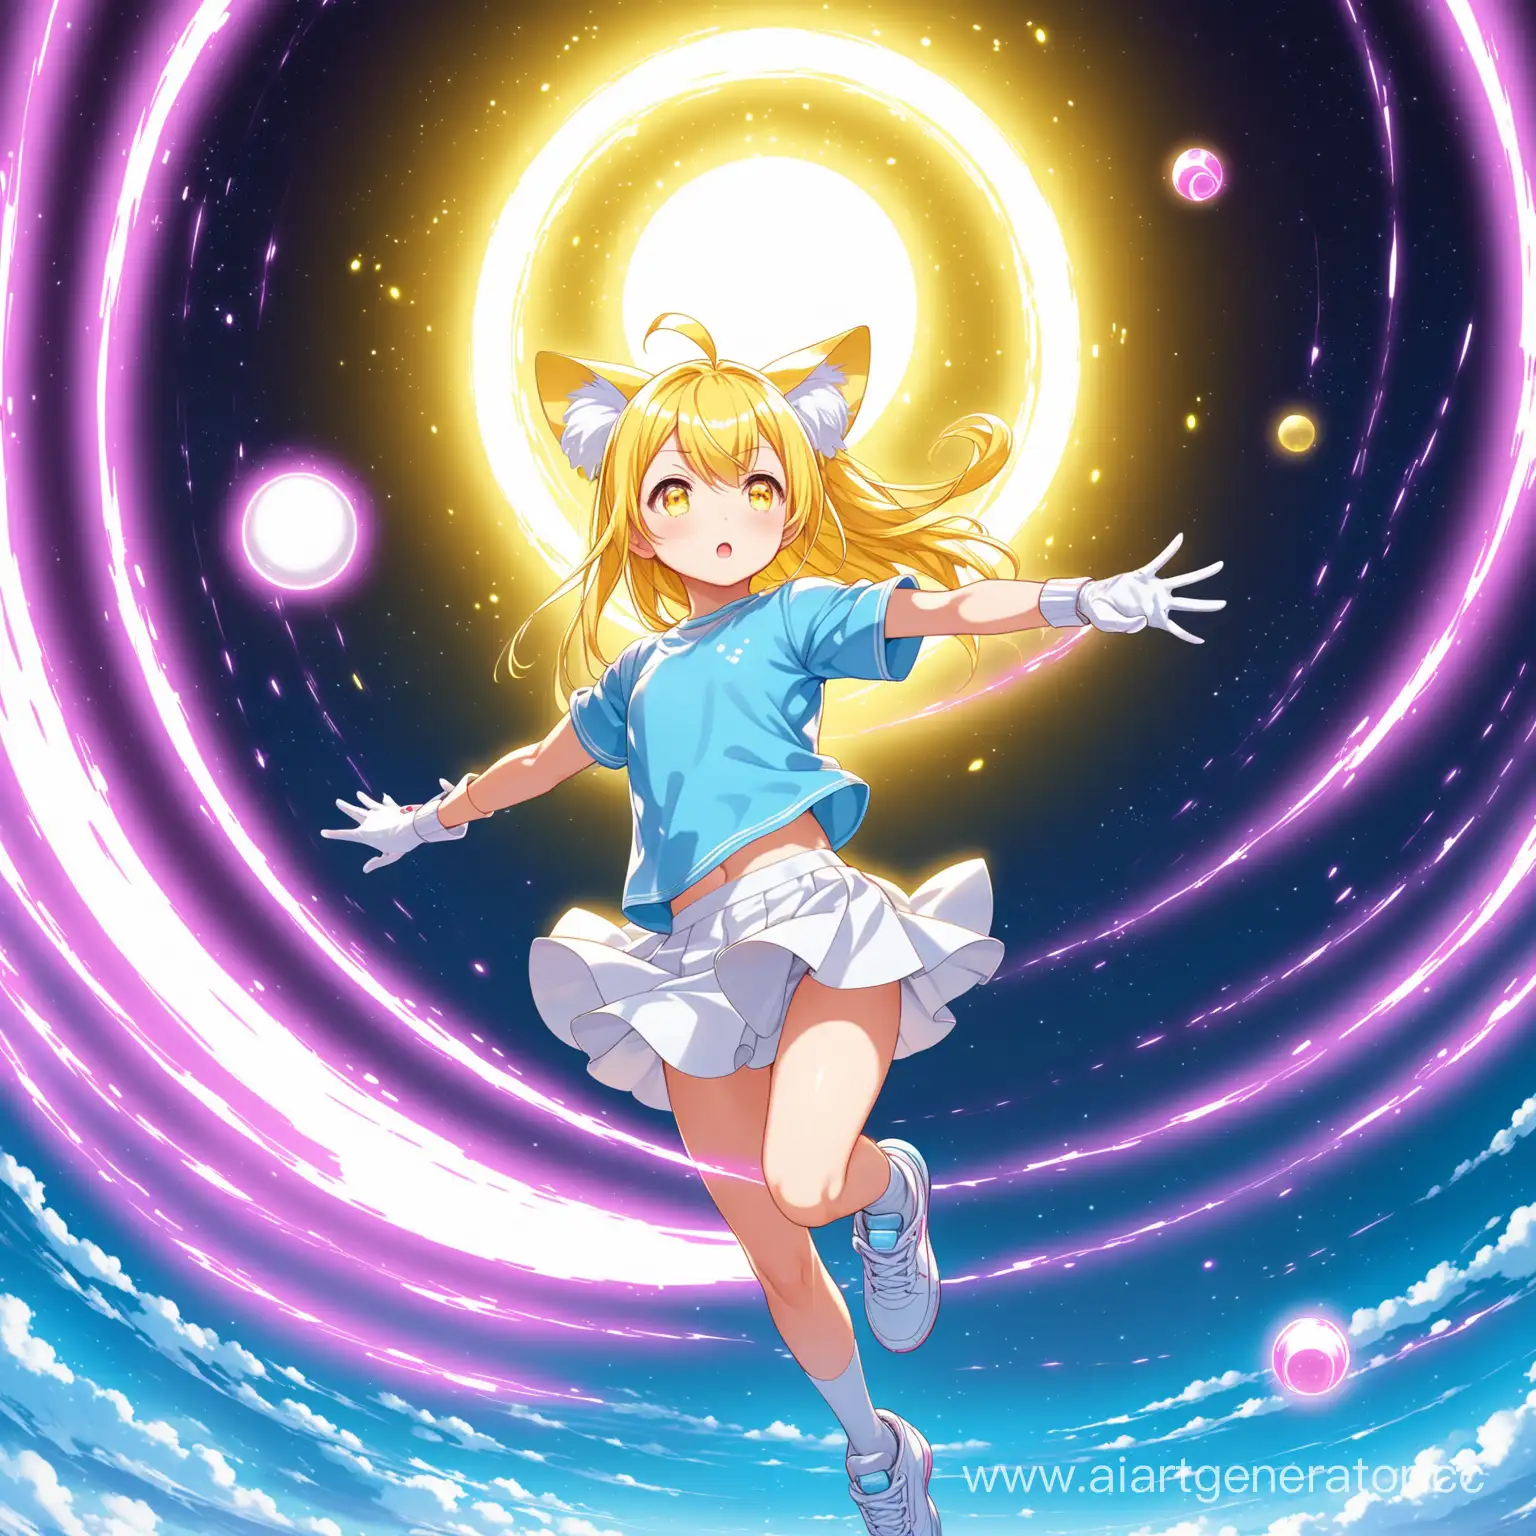 
The girl's body build is somewhere slightly above the loli; yellow ears and tail; long yellow hair; pink eye color; white knee-length skirt; chest size 1; tight blue T-shirt; white sweatshirt; white sneakers; white stockings; white gloves up to the elbow; a technological ball is flying nearby, glowing with yellow light